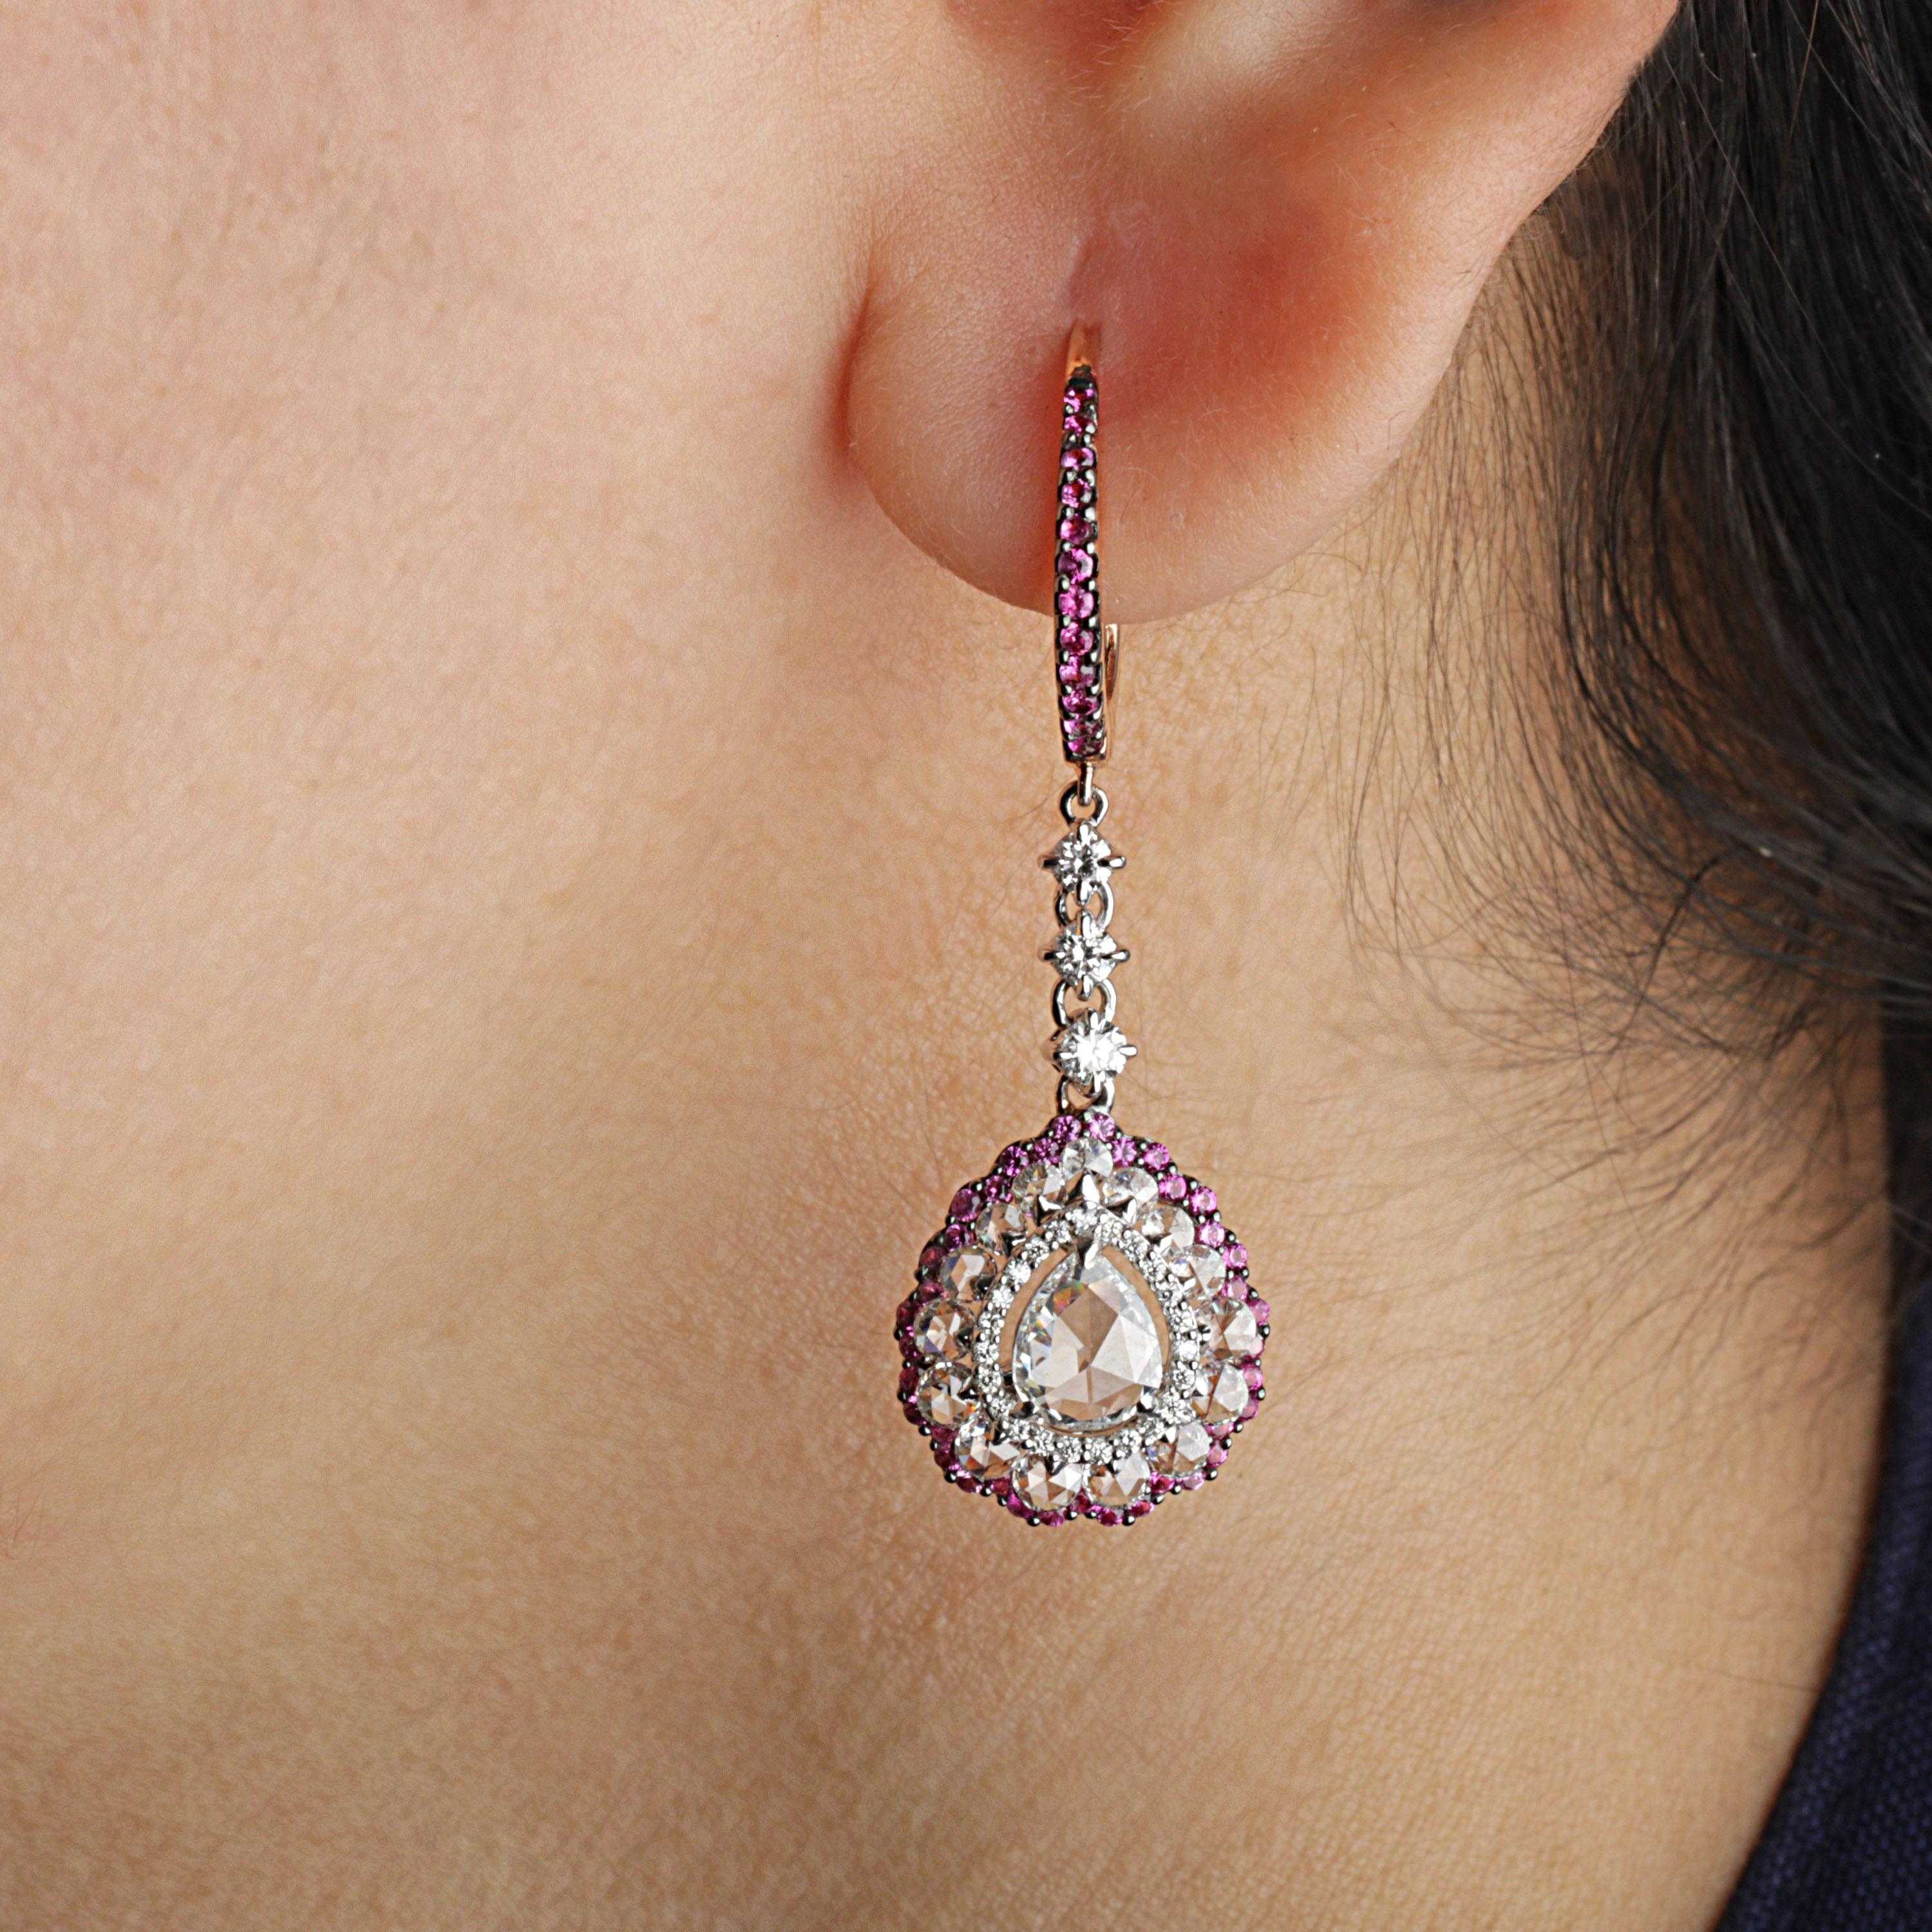 Gross Weight: 5.83 Grams
Diamond Weight: 2.20 Cts
Pink Sapphire Weight: 0.65 cts
IGI Certified: Summary No.: 15J865091903

Video of the product can be shared on Request.

Brilliant and beautiful, these 18K white and rose gold earrings composed with